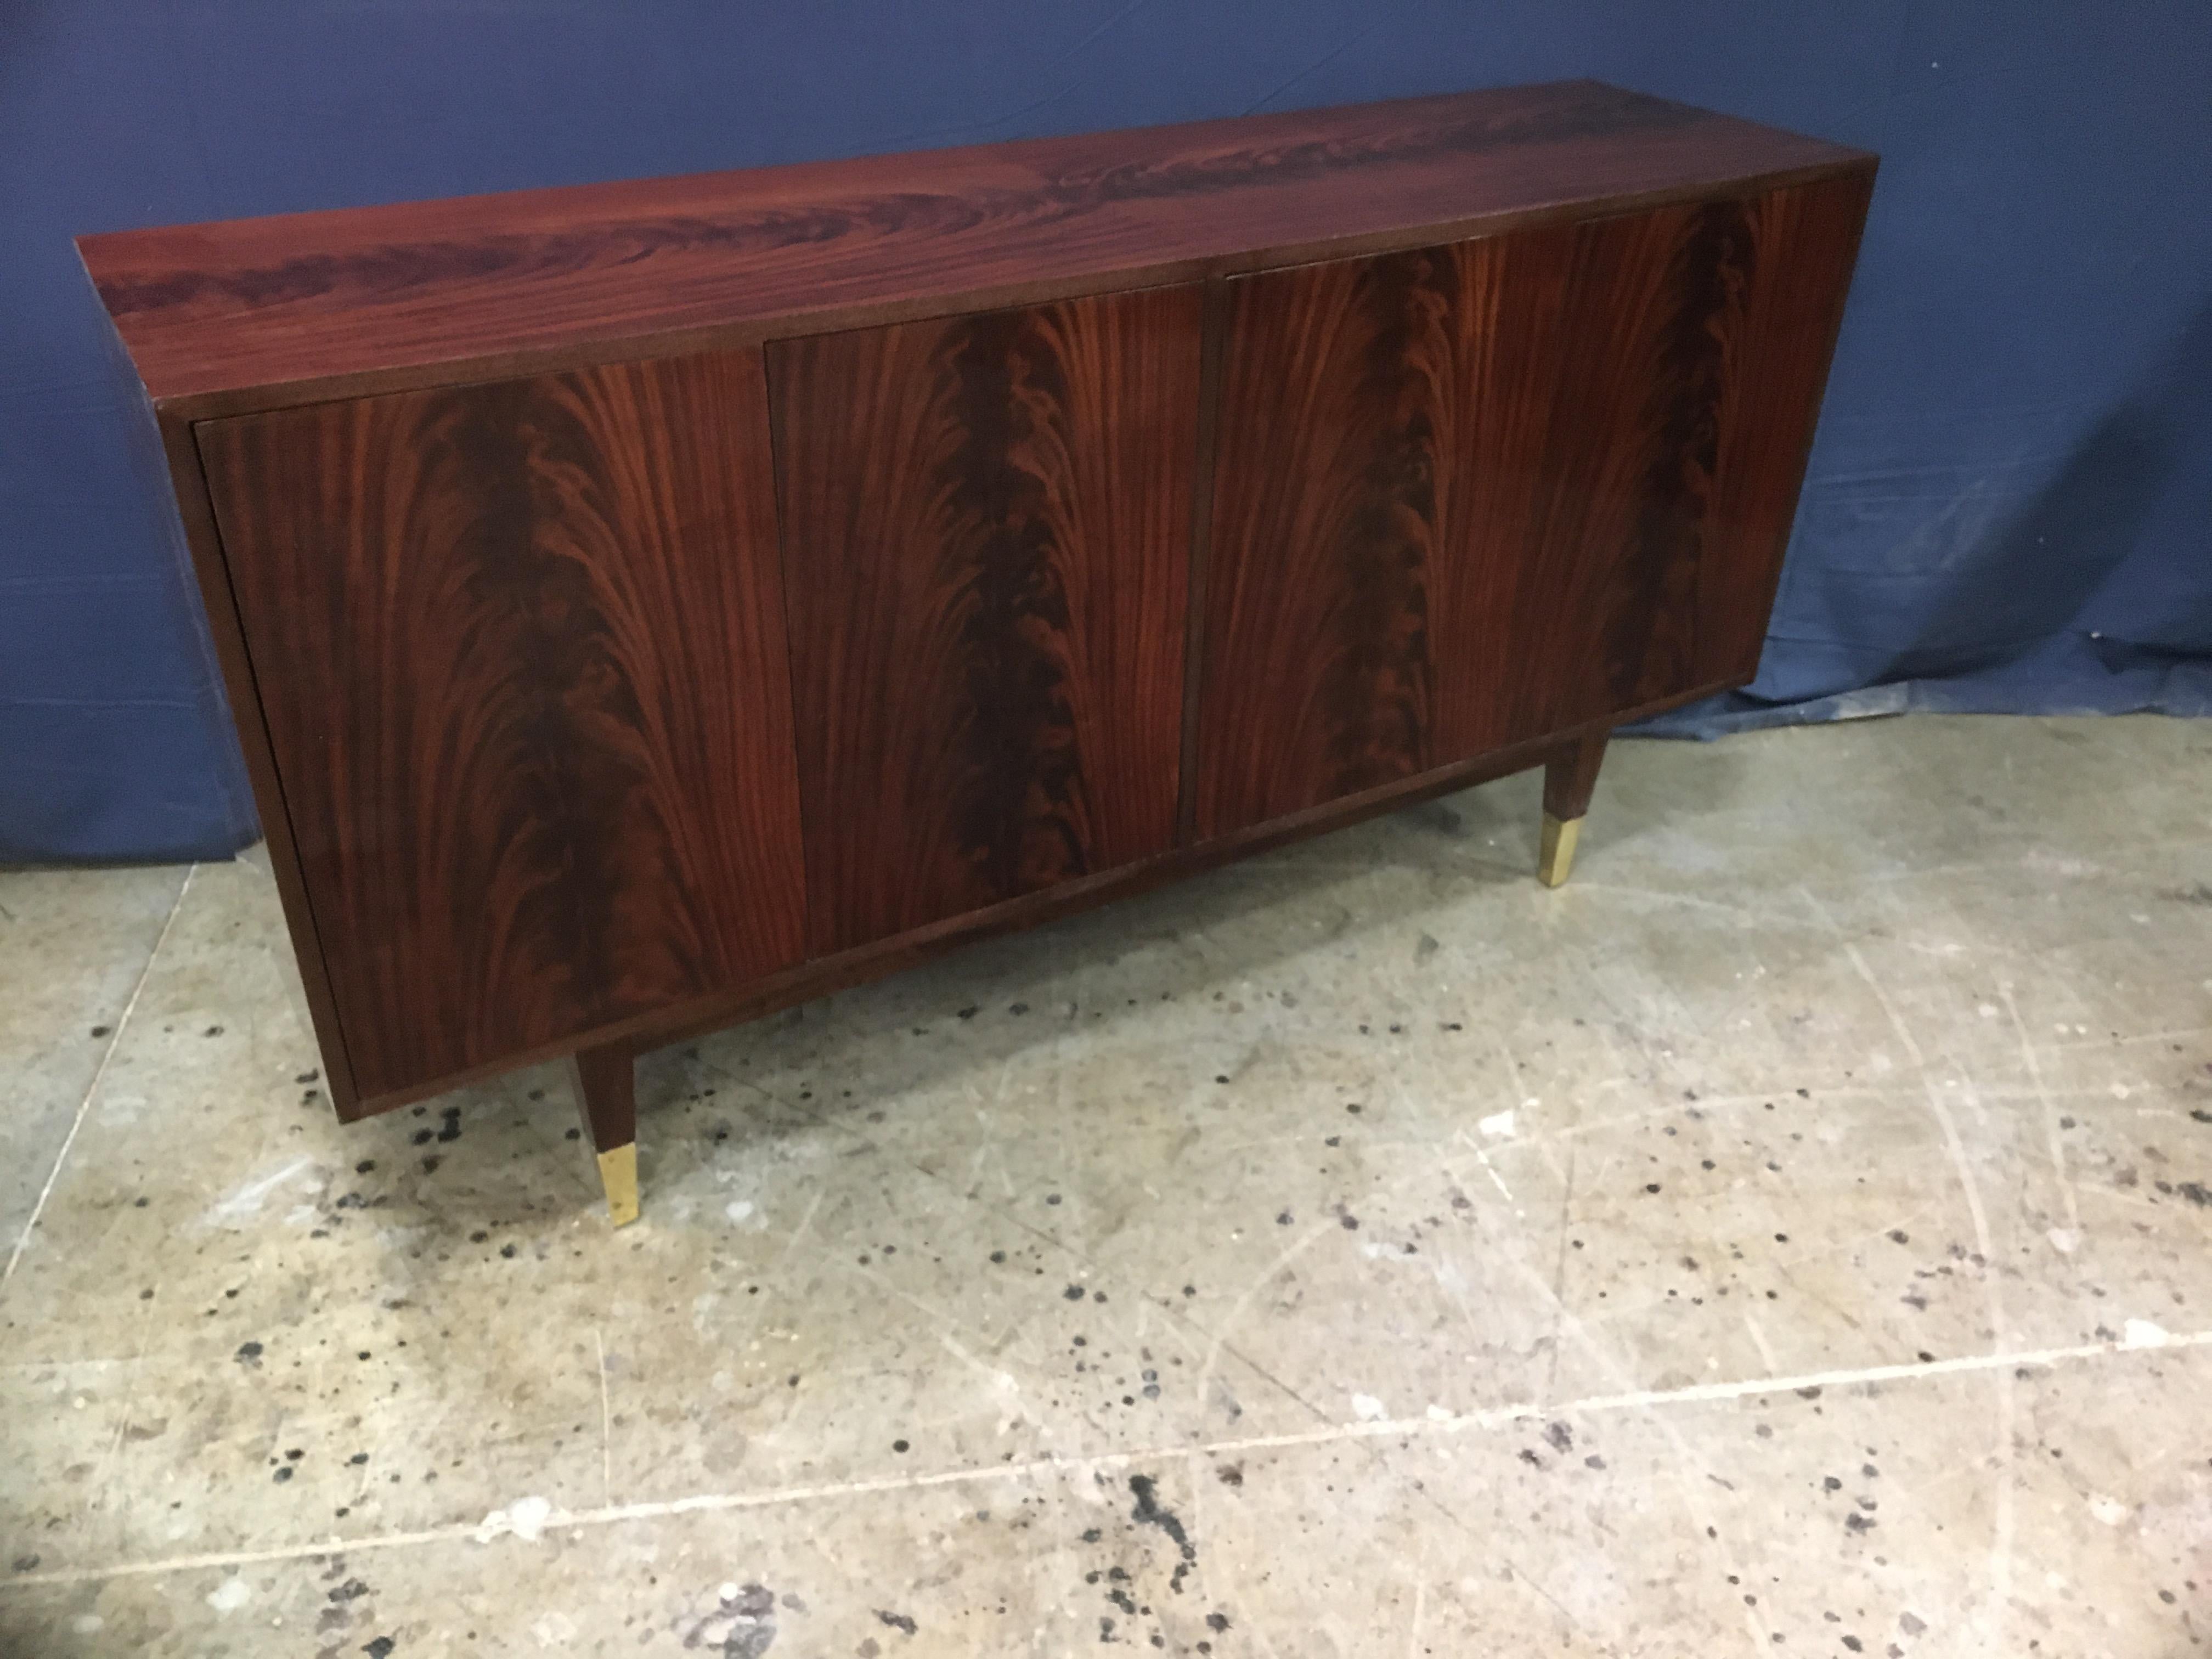 Custom Crotch Mahogany Midcentury Style Sideboard by Leighton Hall In New Condition For Sale In Suwanee, GA